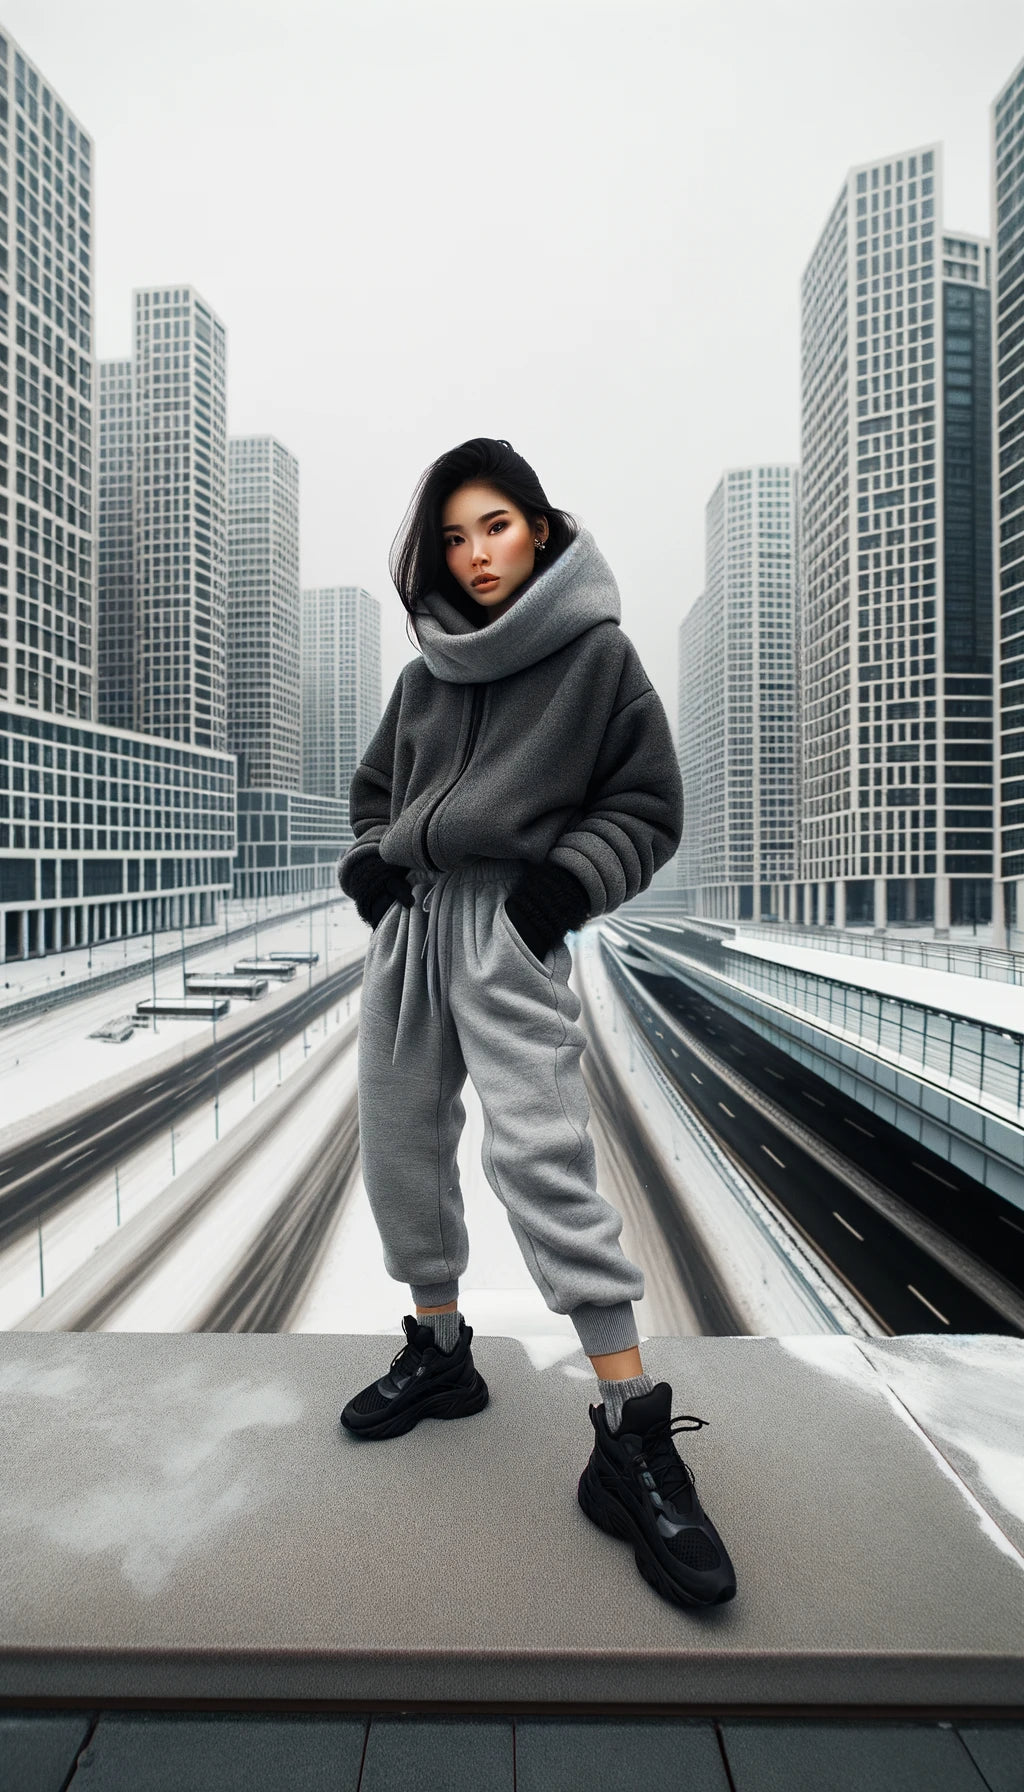 10 Reasons Why Winter Outfits Do Well with Athleisure Looks